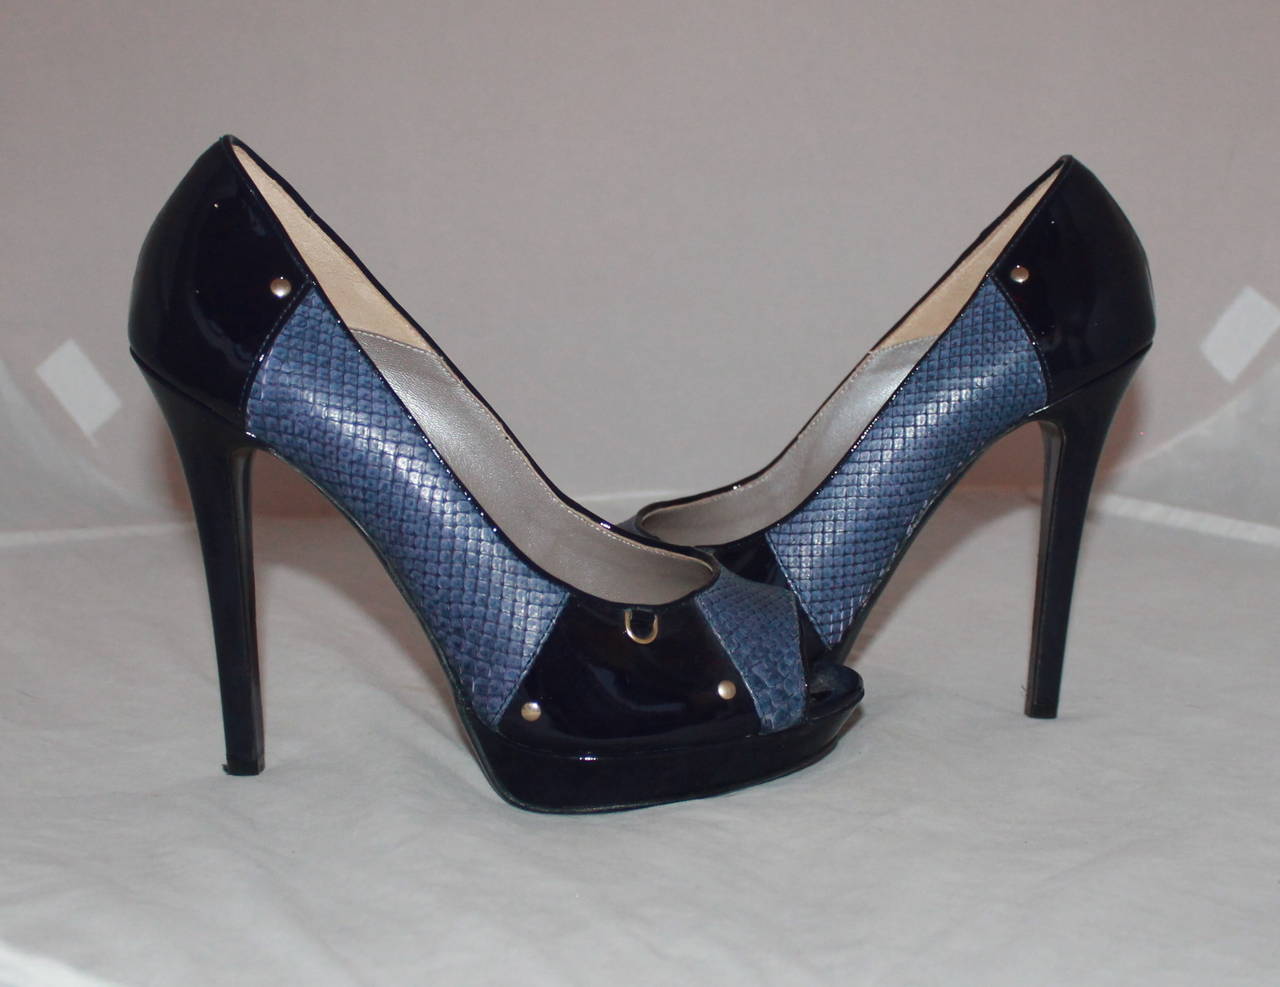 Versace Indigo Snake & Patent Peep-toe Pumps - 40. These shoes are in excellent condition with barely any wear on the bottom. One bottom heel has a chip but it does not affect the patent and can be replaced (image 5).